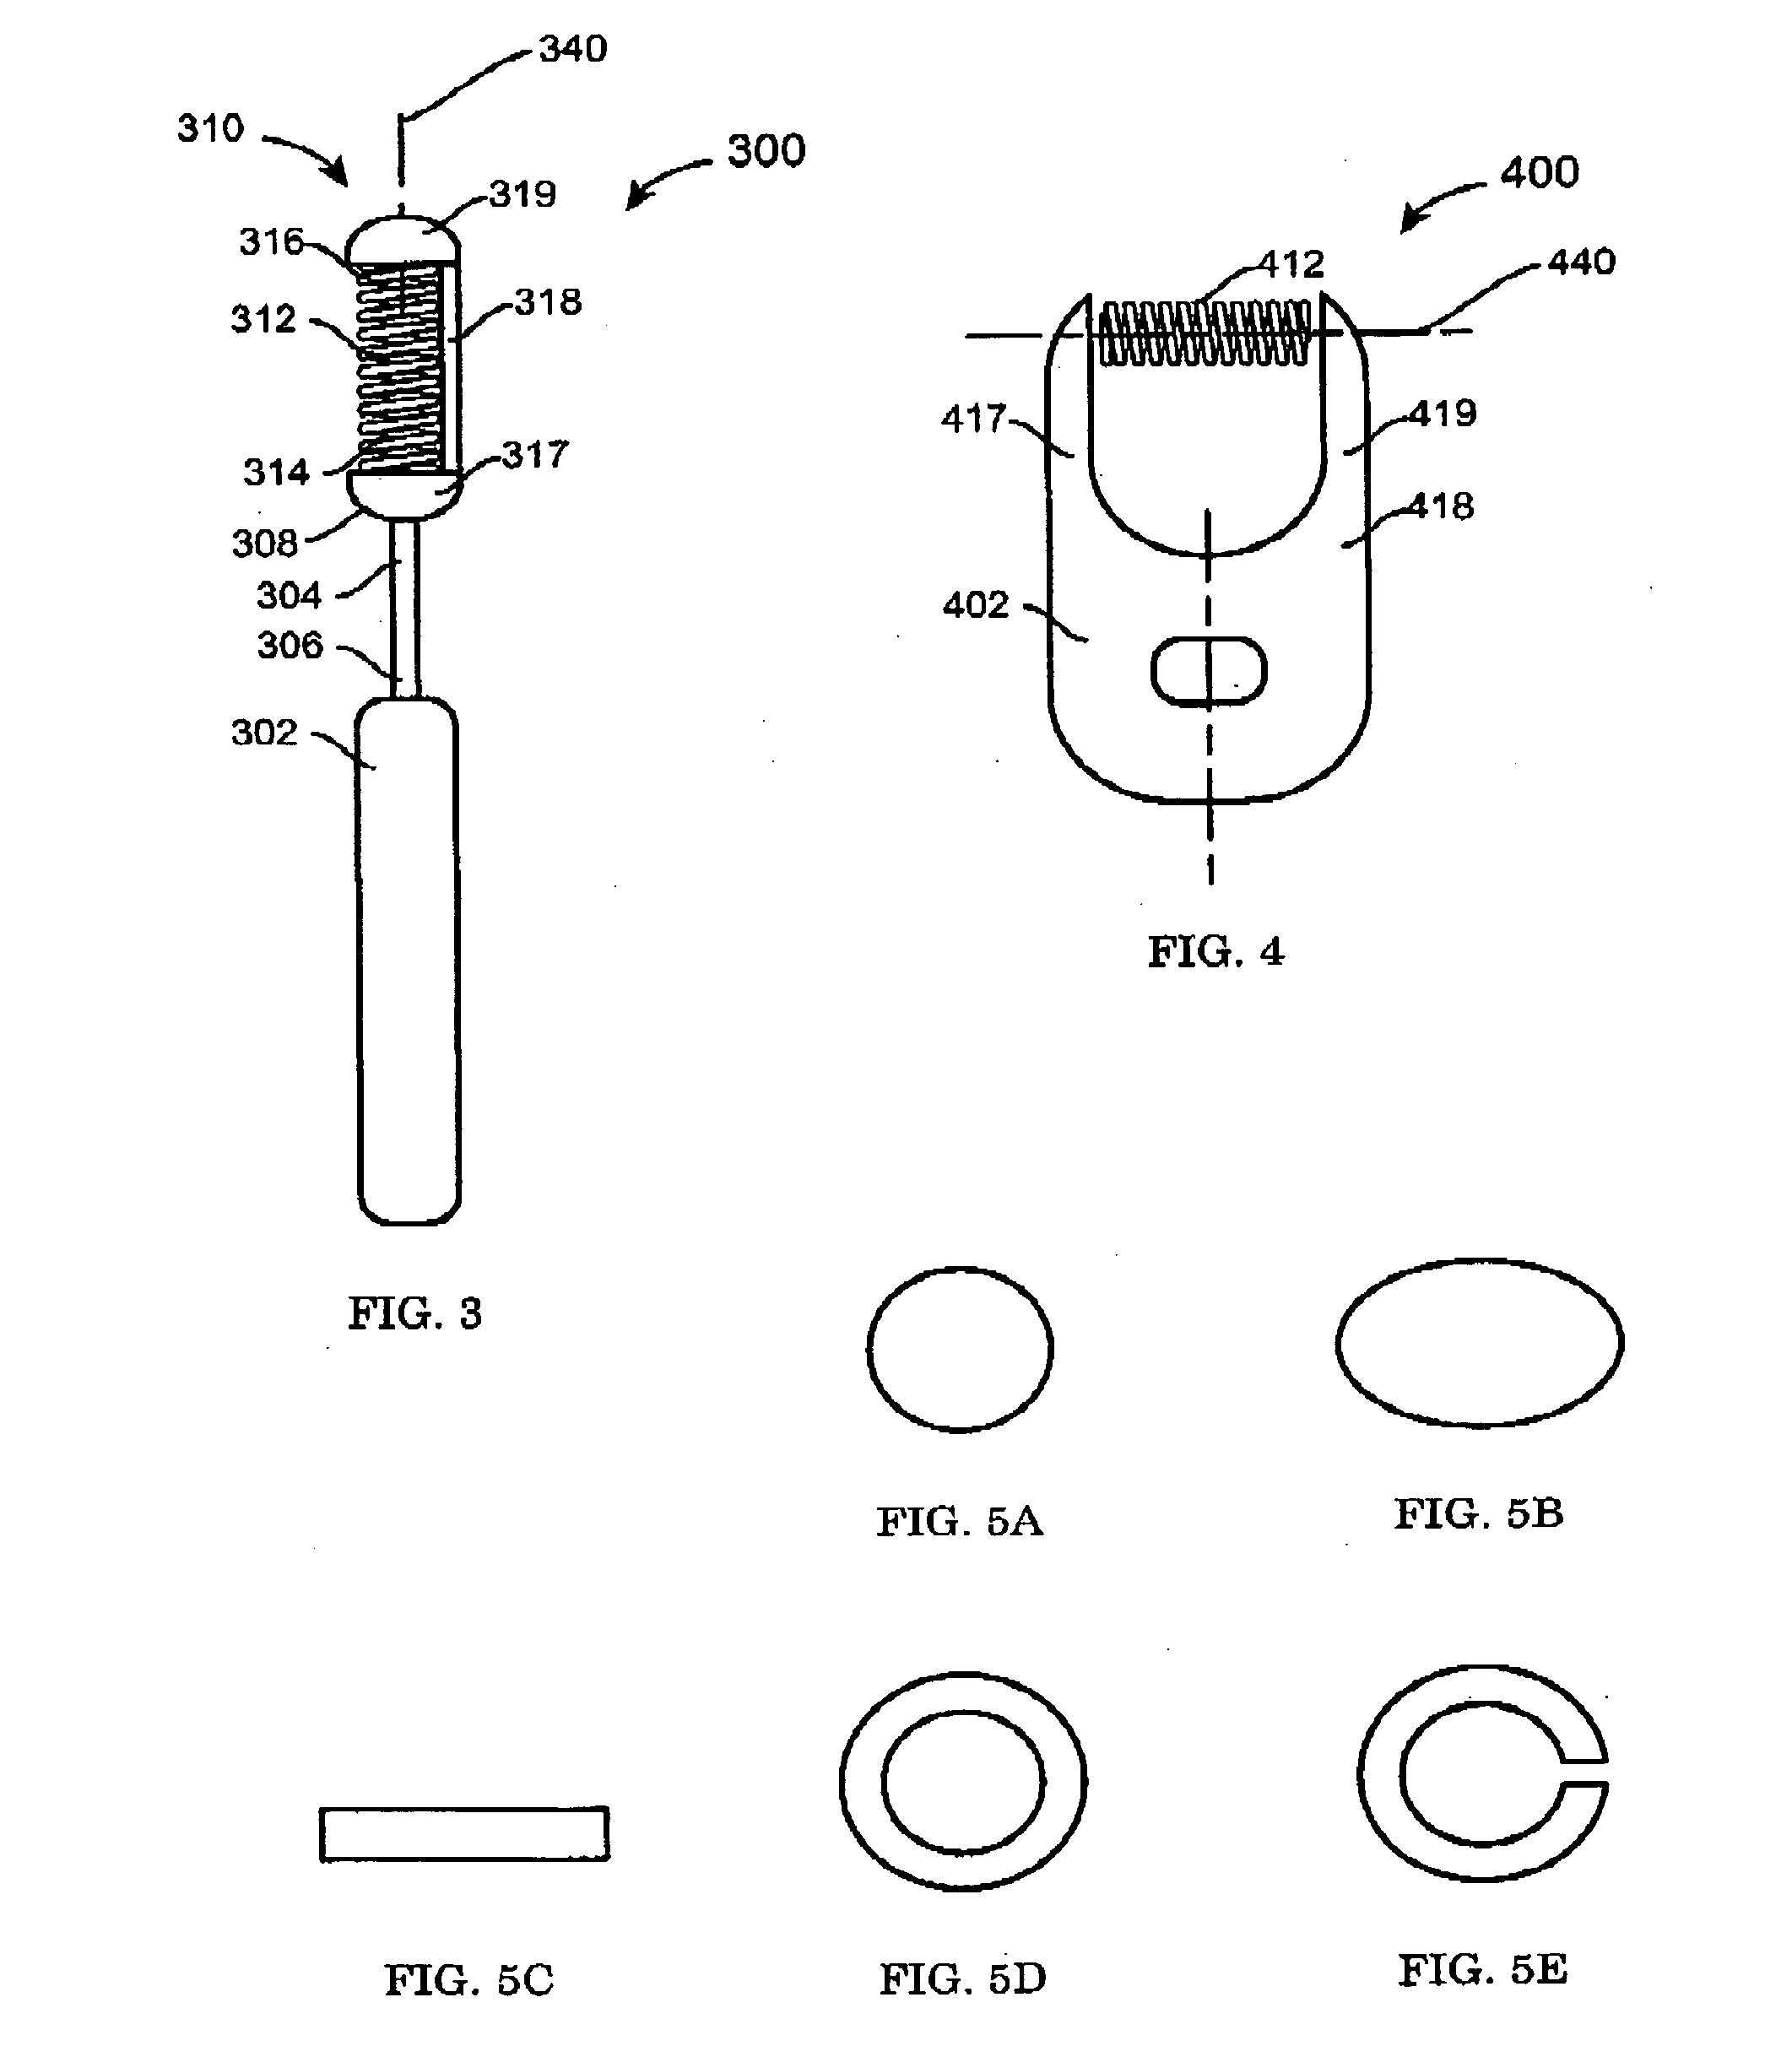 Applicator system with helical applicator surface and source